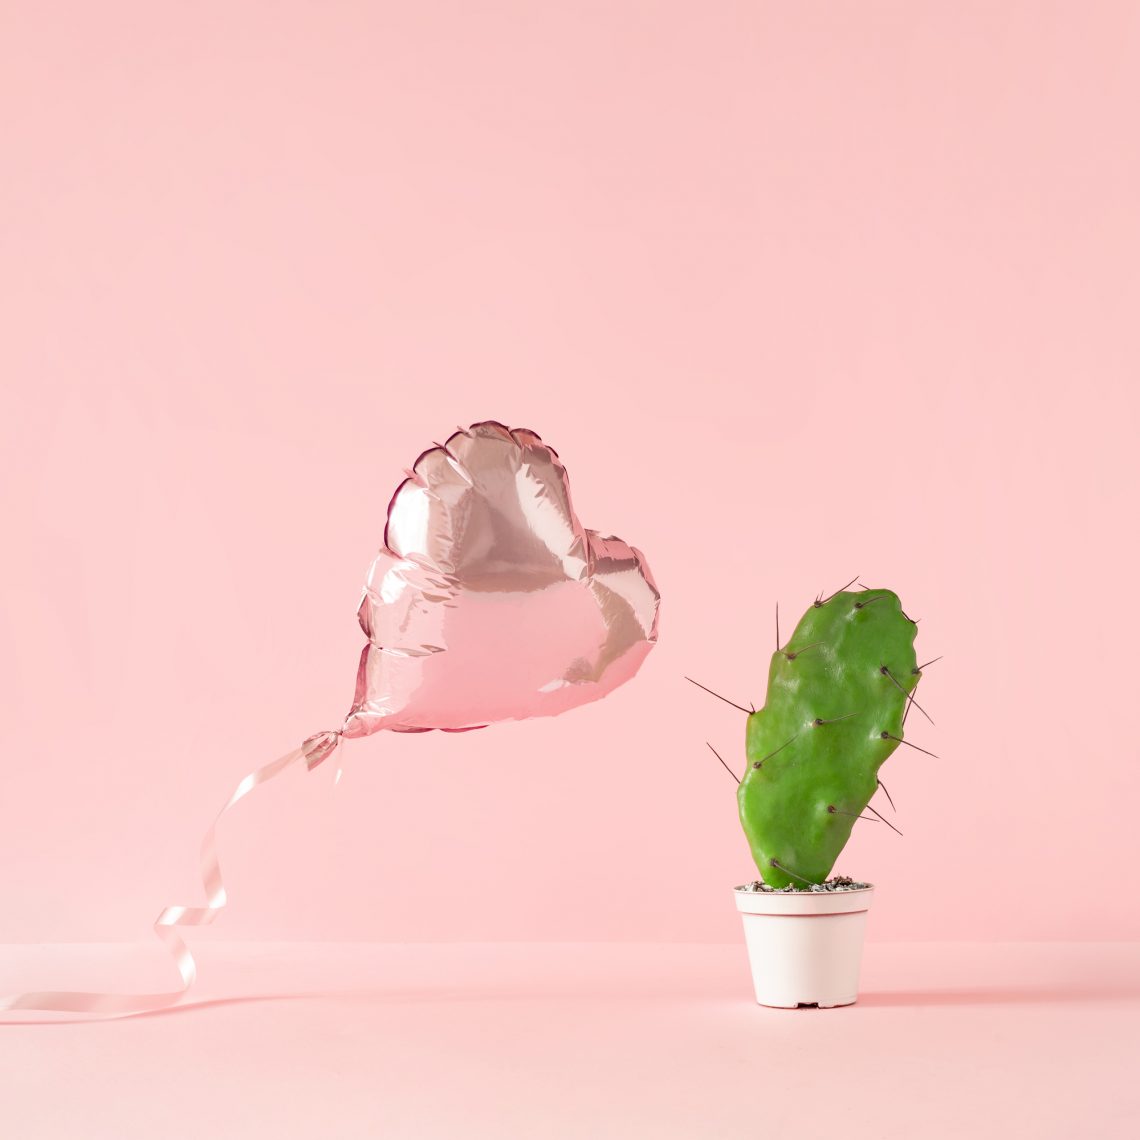 Heart shaped foil balloon with cactus plant and pink background.